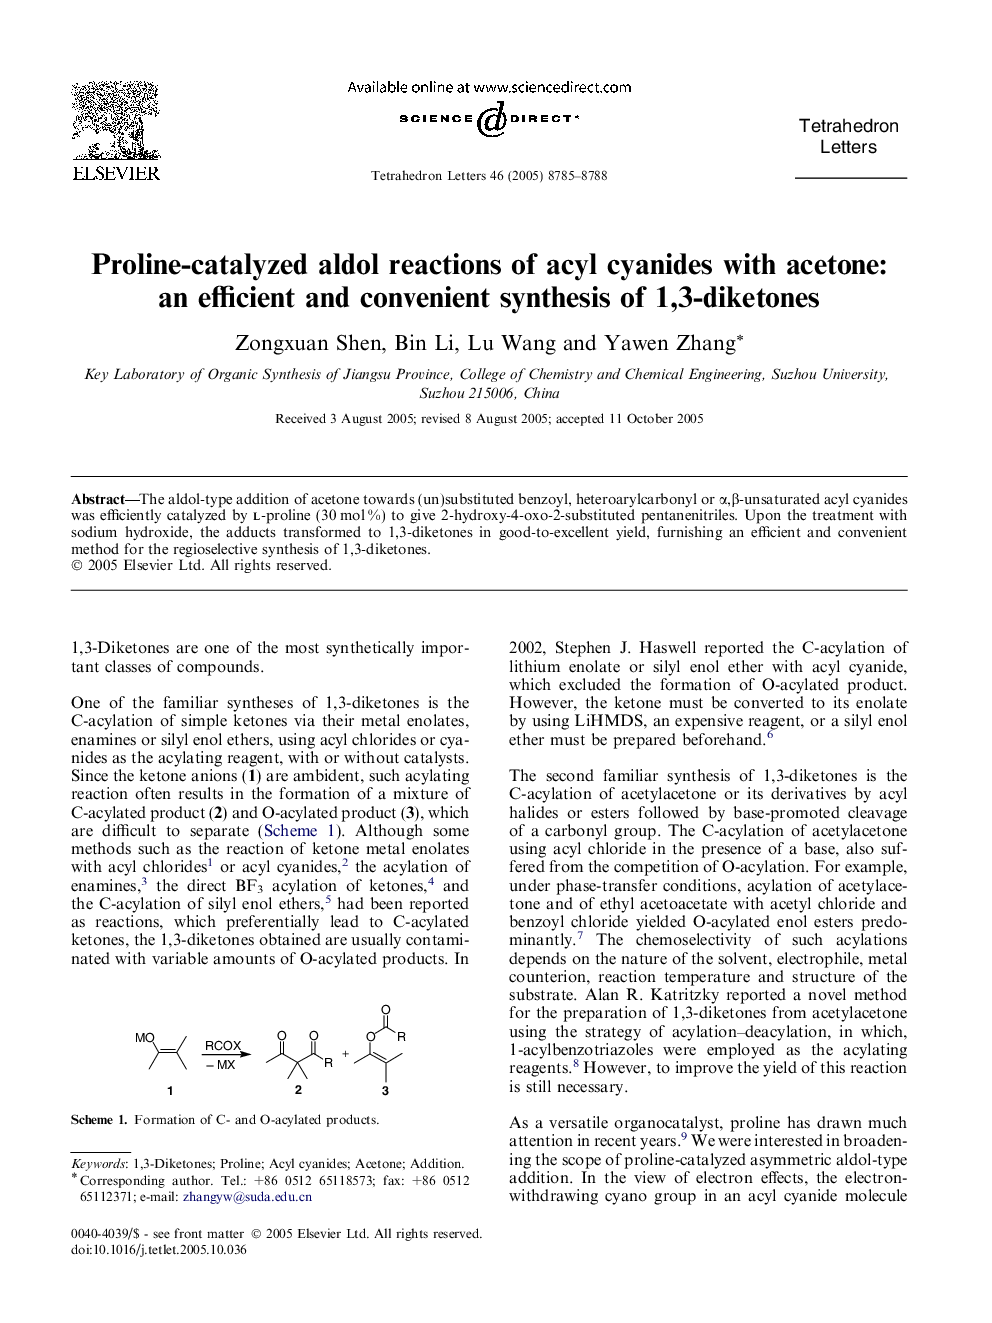 Proline-catalyzed aldol reactions of acyl cyanides with acetone: an efficient and convenient synthesis of 1,3-diketones